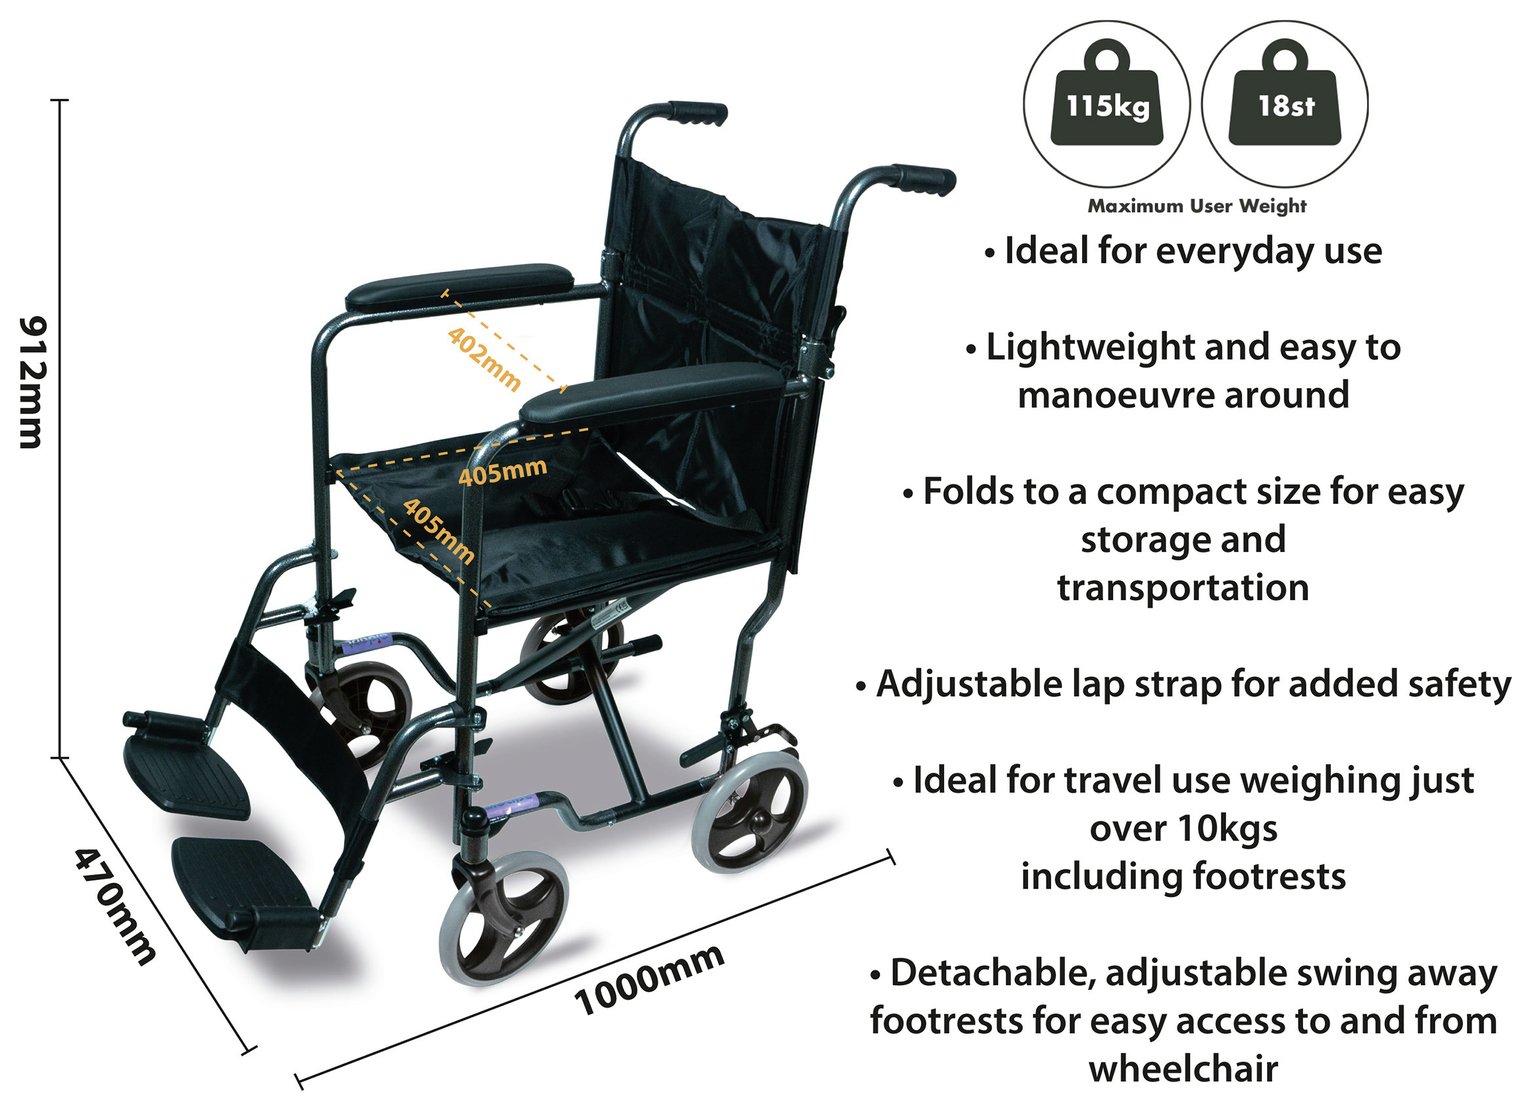 Aidapt Steel Compact Transport Wheelchair Review